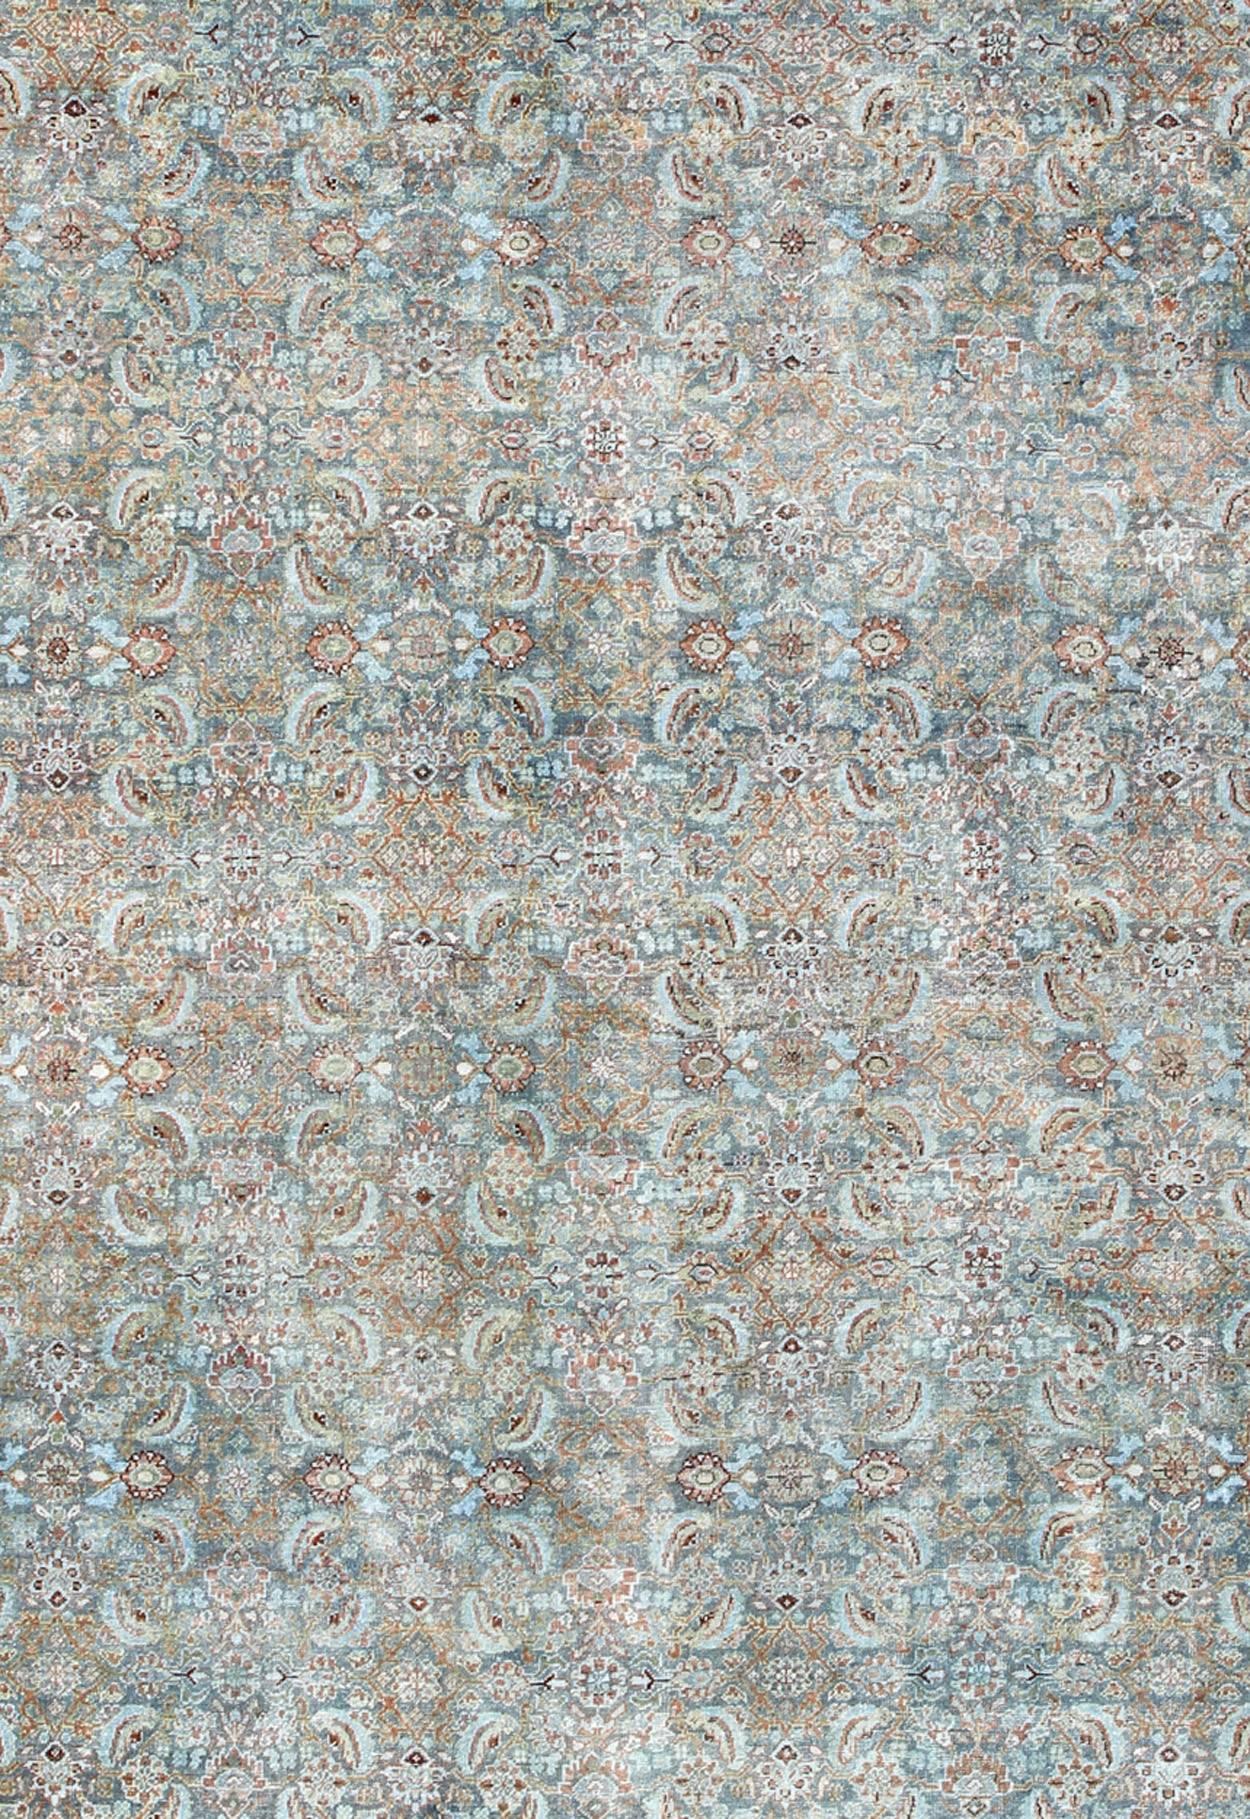 Antique Persian Sultanabad Rug with All-Over Design in Light Blue & Burnt Orange In Good Condition For Sale In Atlanta, GA